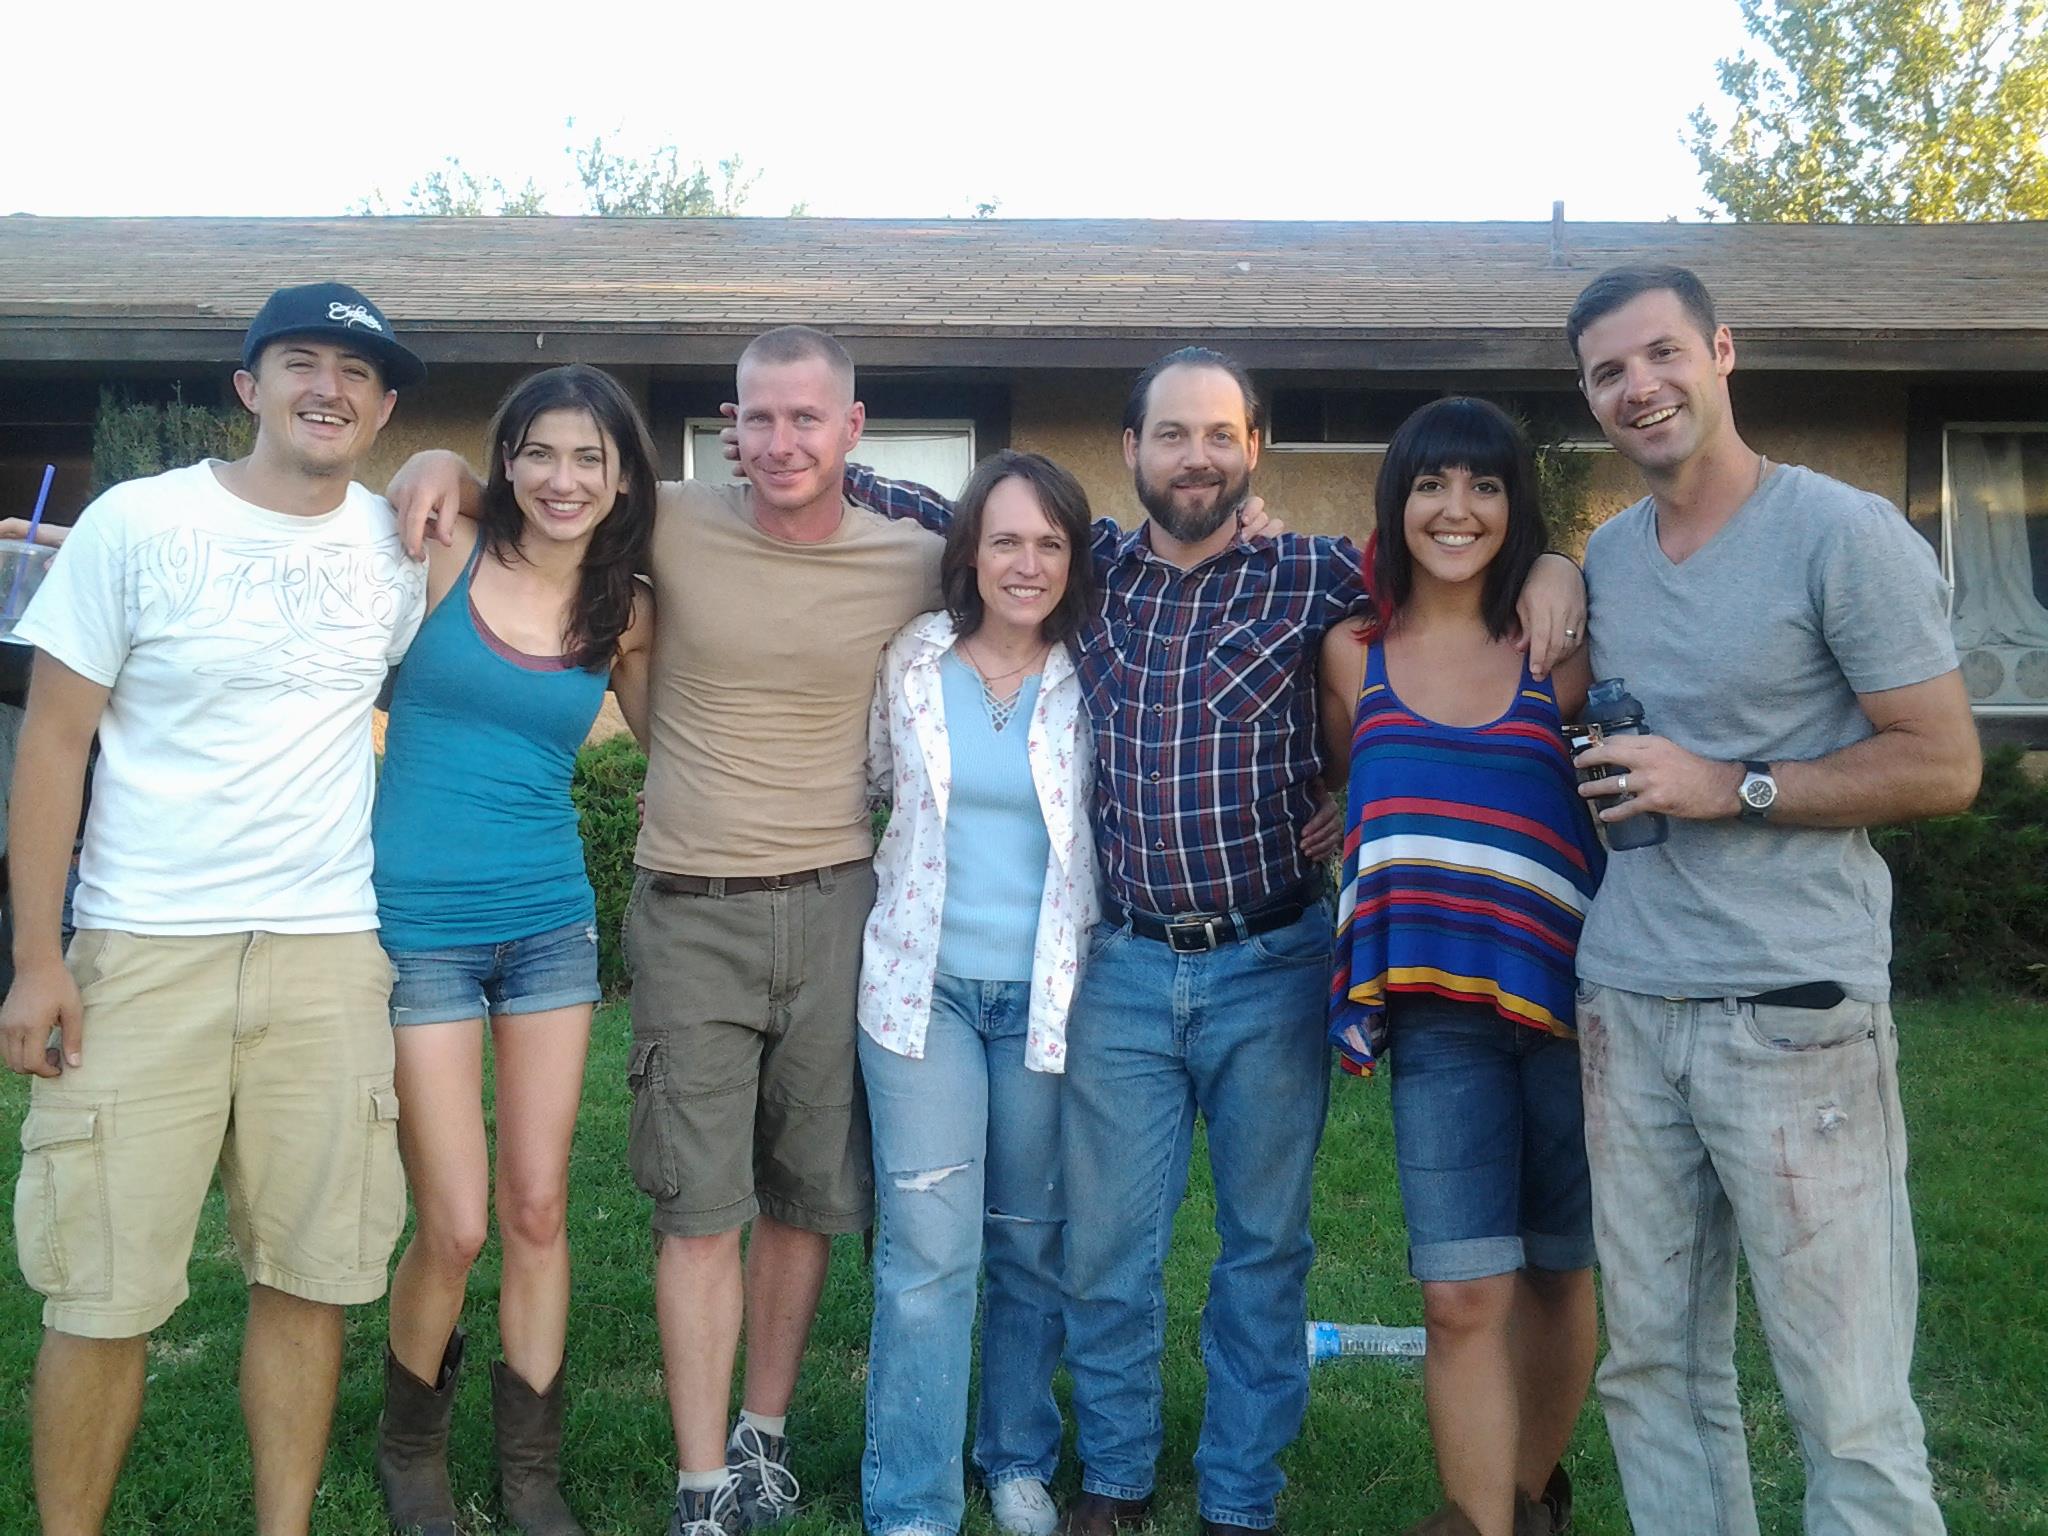 Dinner time break for Director, James Thomas, and cast of Get Away: Robyn Buck, Canyon Prince, Shondale Seymour, J Michael Biggs, Tami Carey and Dave Finn